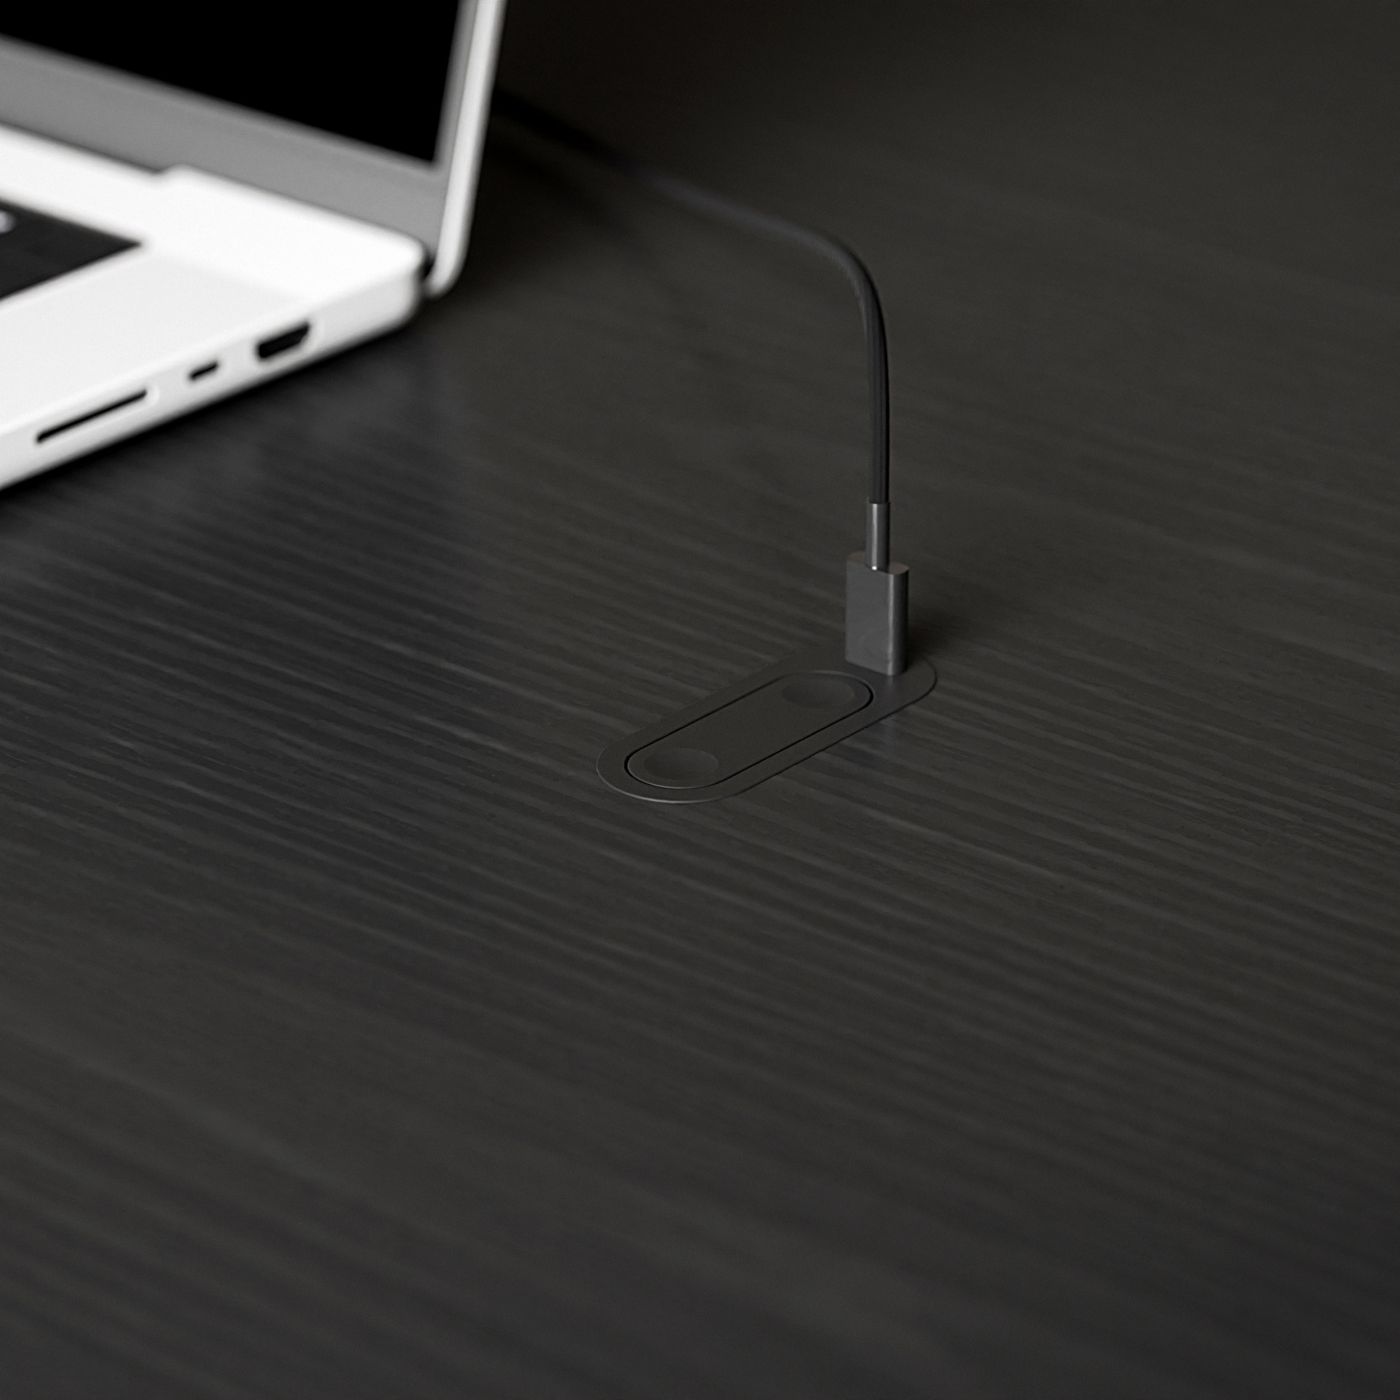 HELM's surface control incorporates minamilist adjustable height controls with USB-C connectivity.